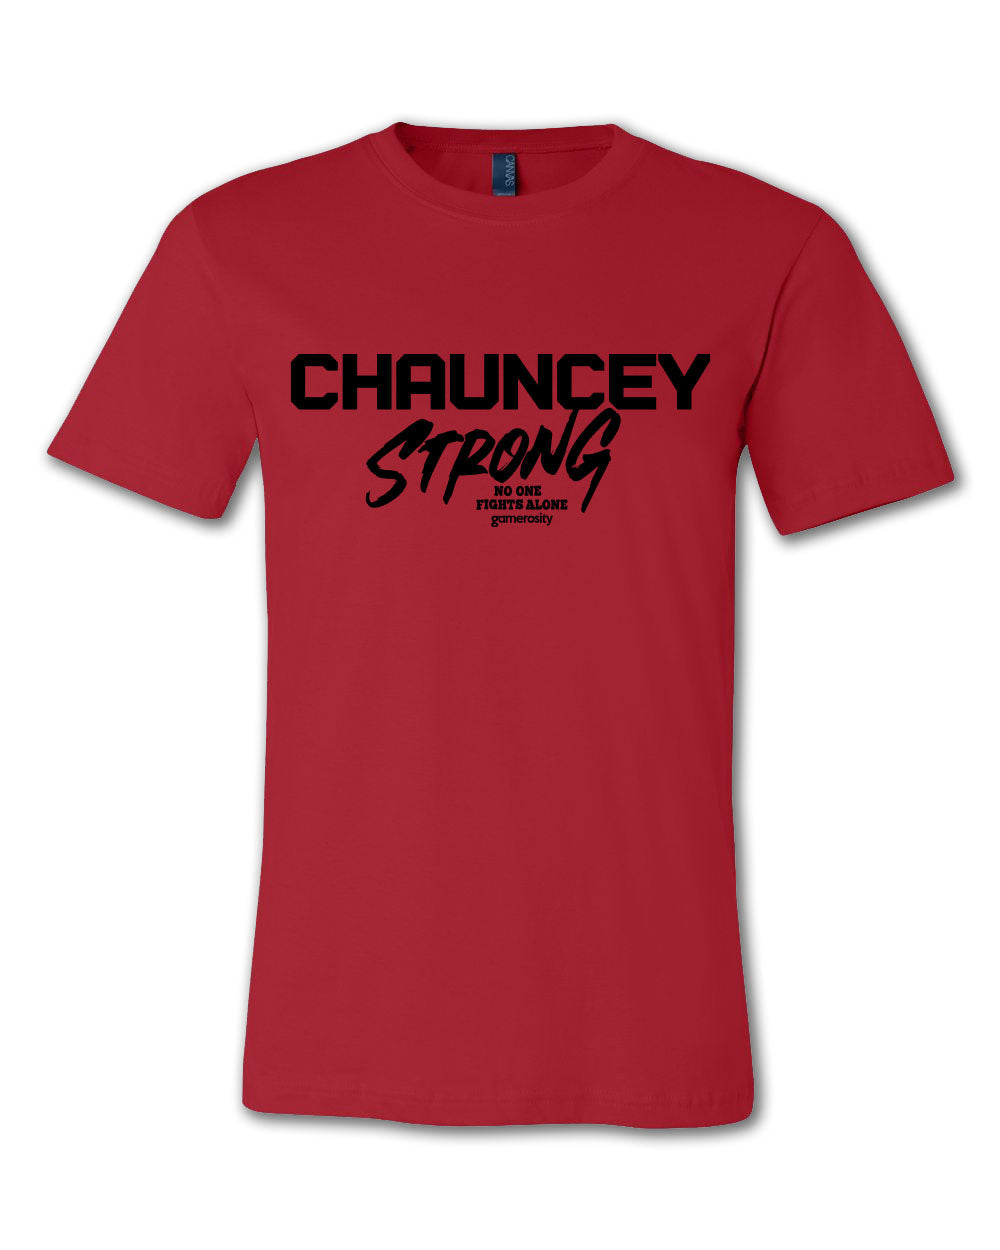 Chauncey Strong